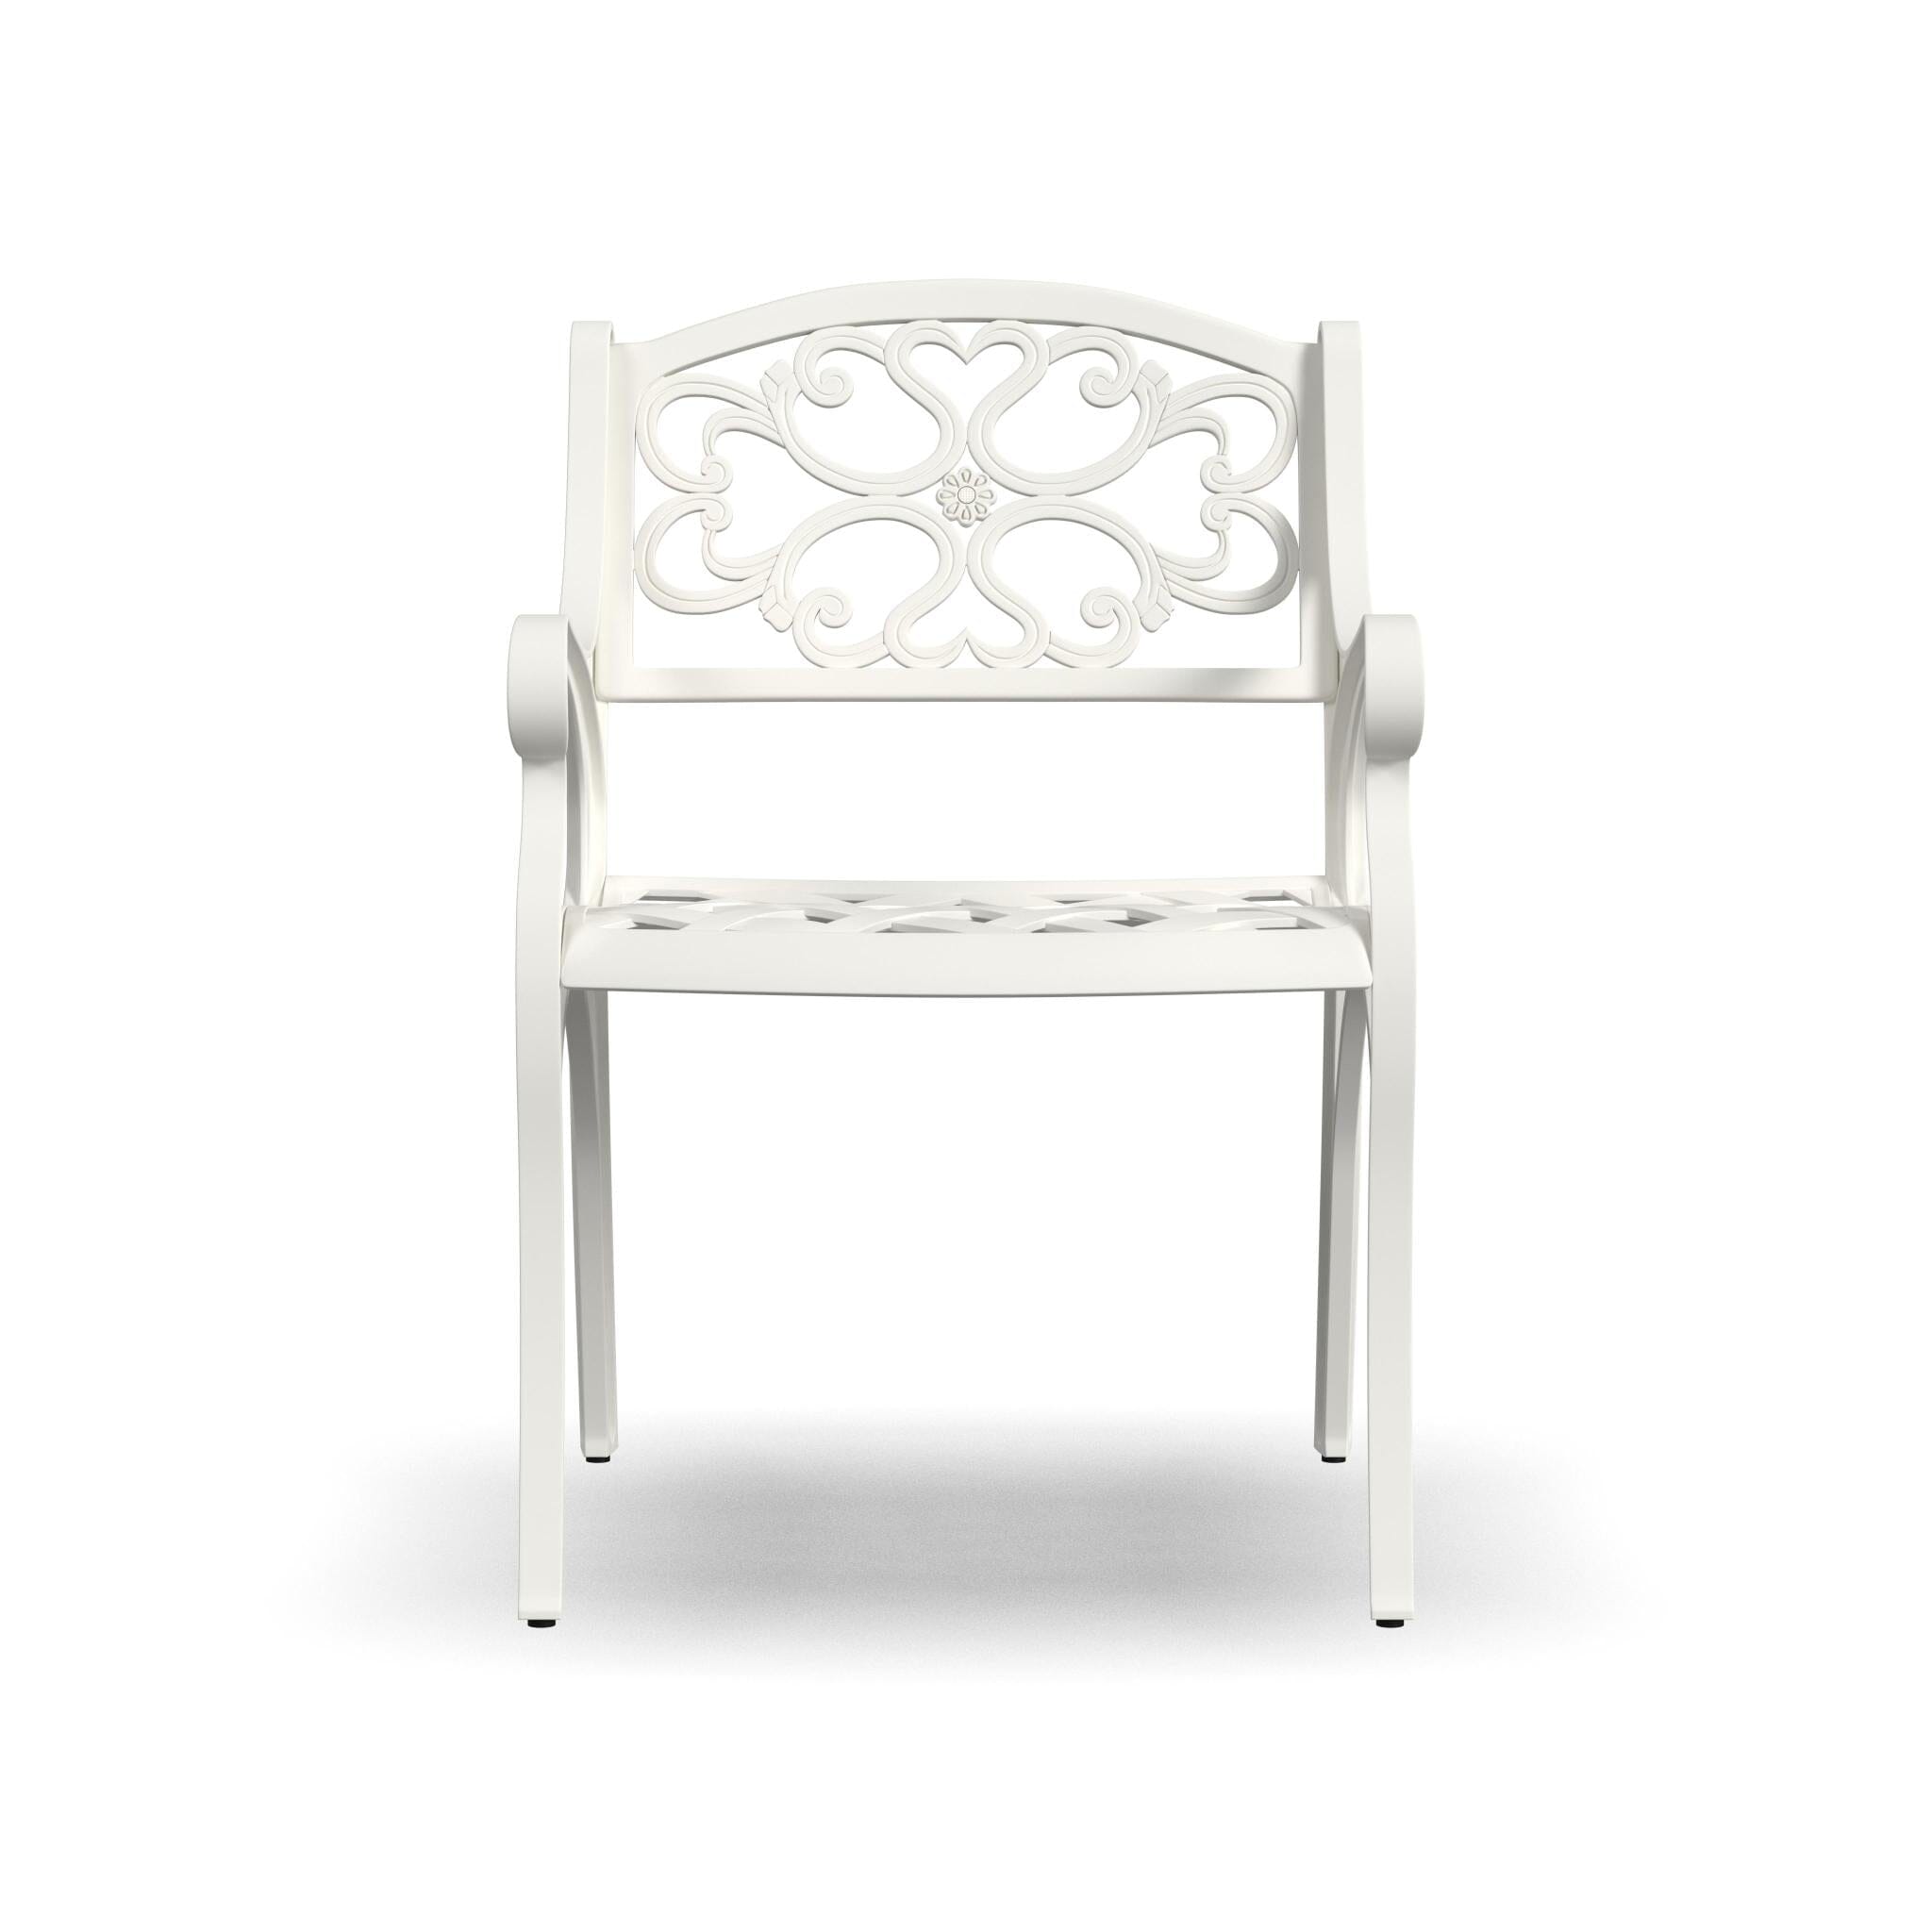 Traditional Outdoor Chair Pair By Sanibel Outdoor Chair Sanibel